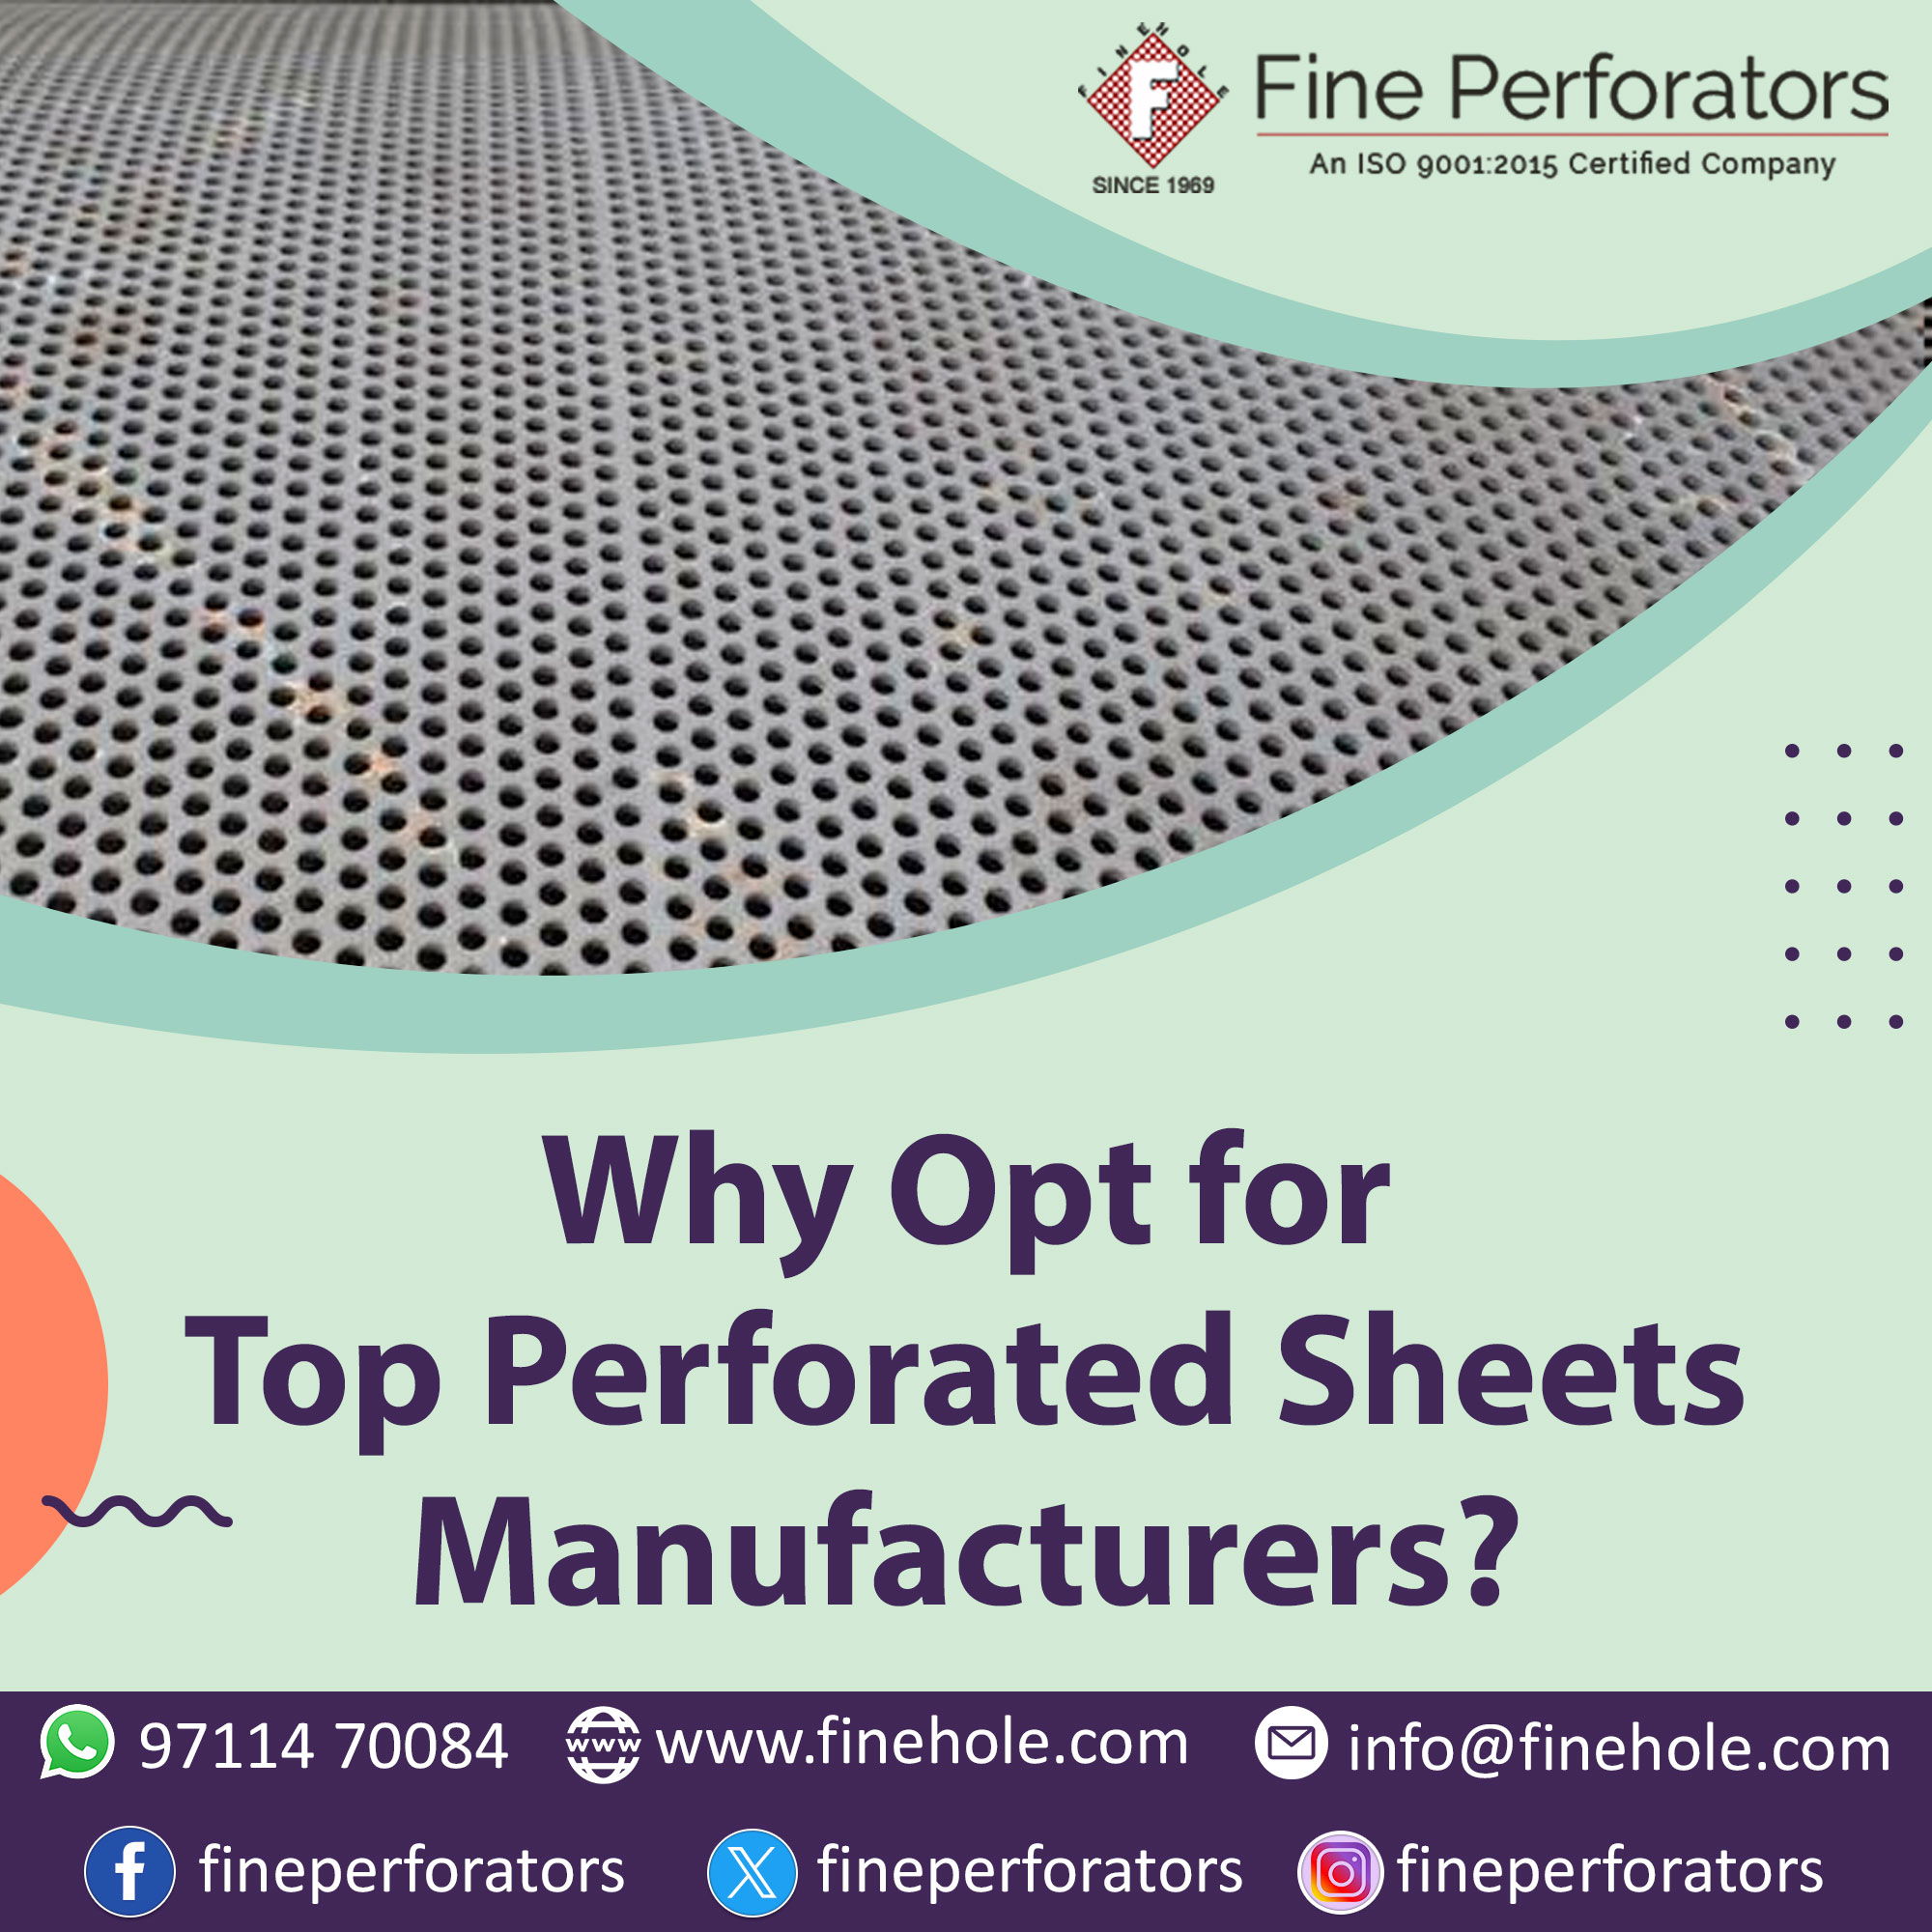 normal 6641d881ddf3b - Why Opt for Top Perforated Sheets Manufacturers?